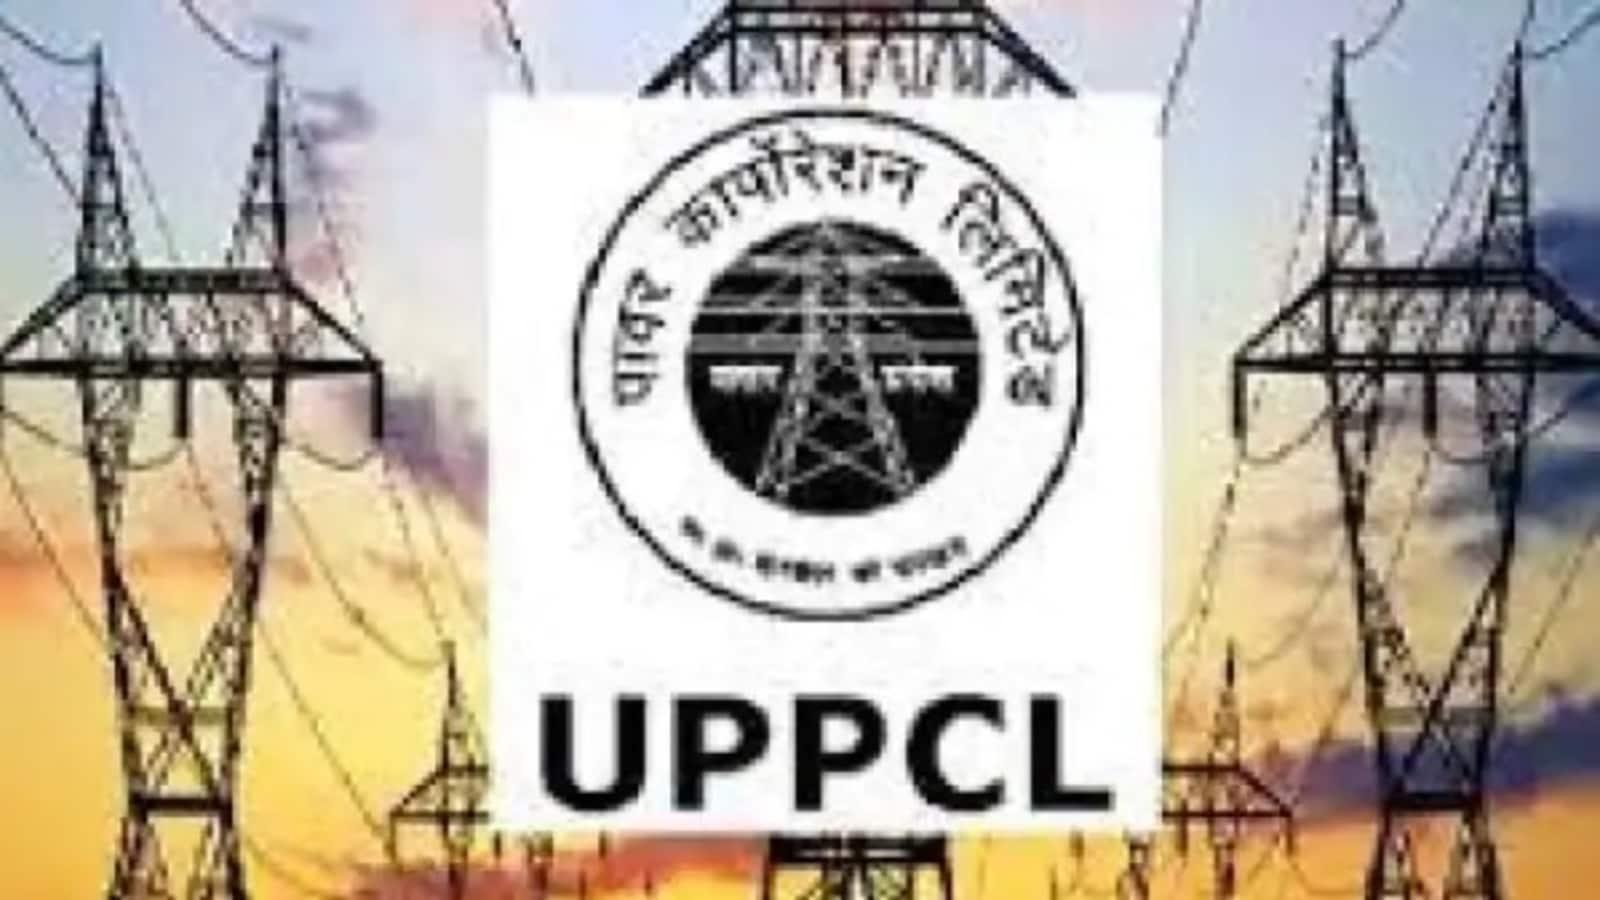 Promising Career Opportunities at UPPCL